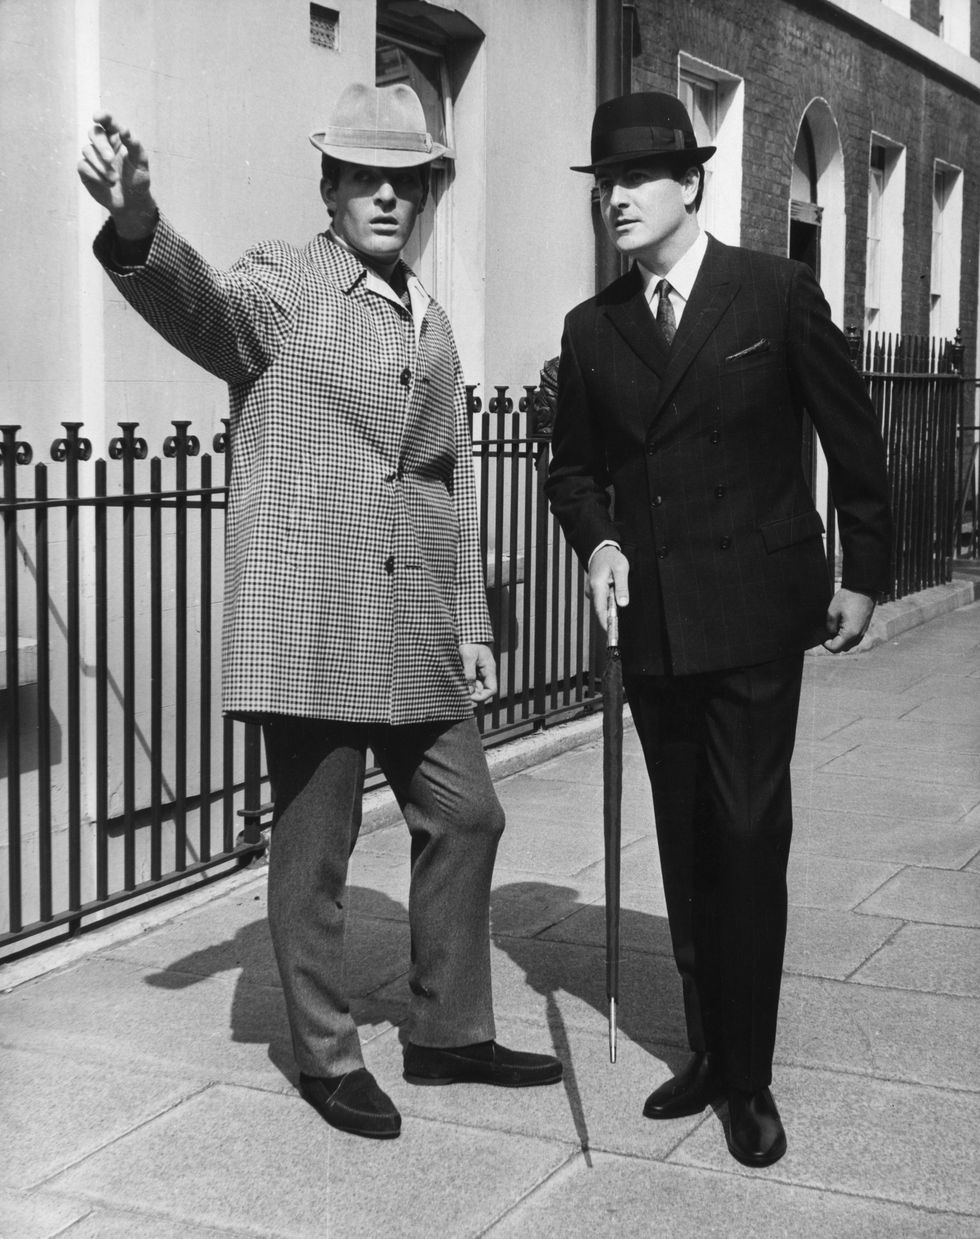 2nd june 1966  two of the suits designed by members of the british menswear guild, on show at a reception held in london to welcome derek rose, the guilds new chairman jim ryan left models a check raincoat by aquascutum ltd, with a corduroy hat by christy  co john fenton wears a double breasted suit by simpson daks, with six buttons  photo by keystonegetty images